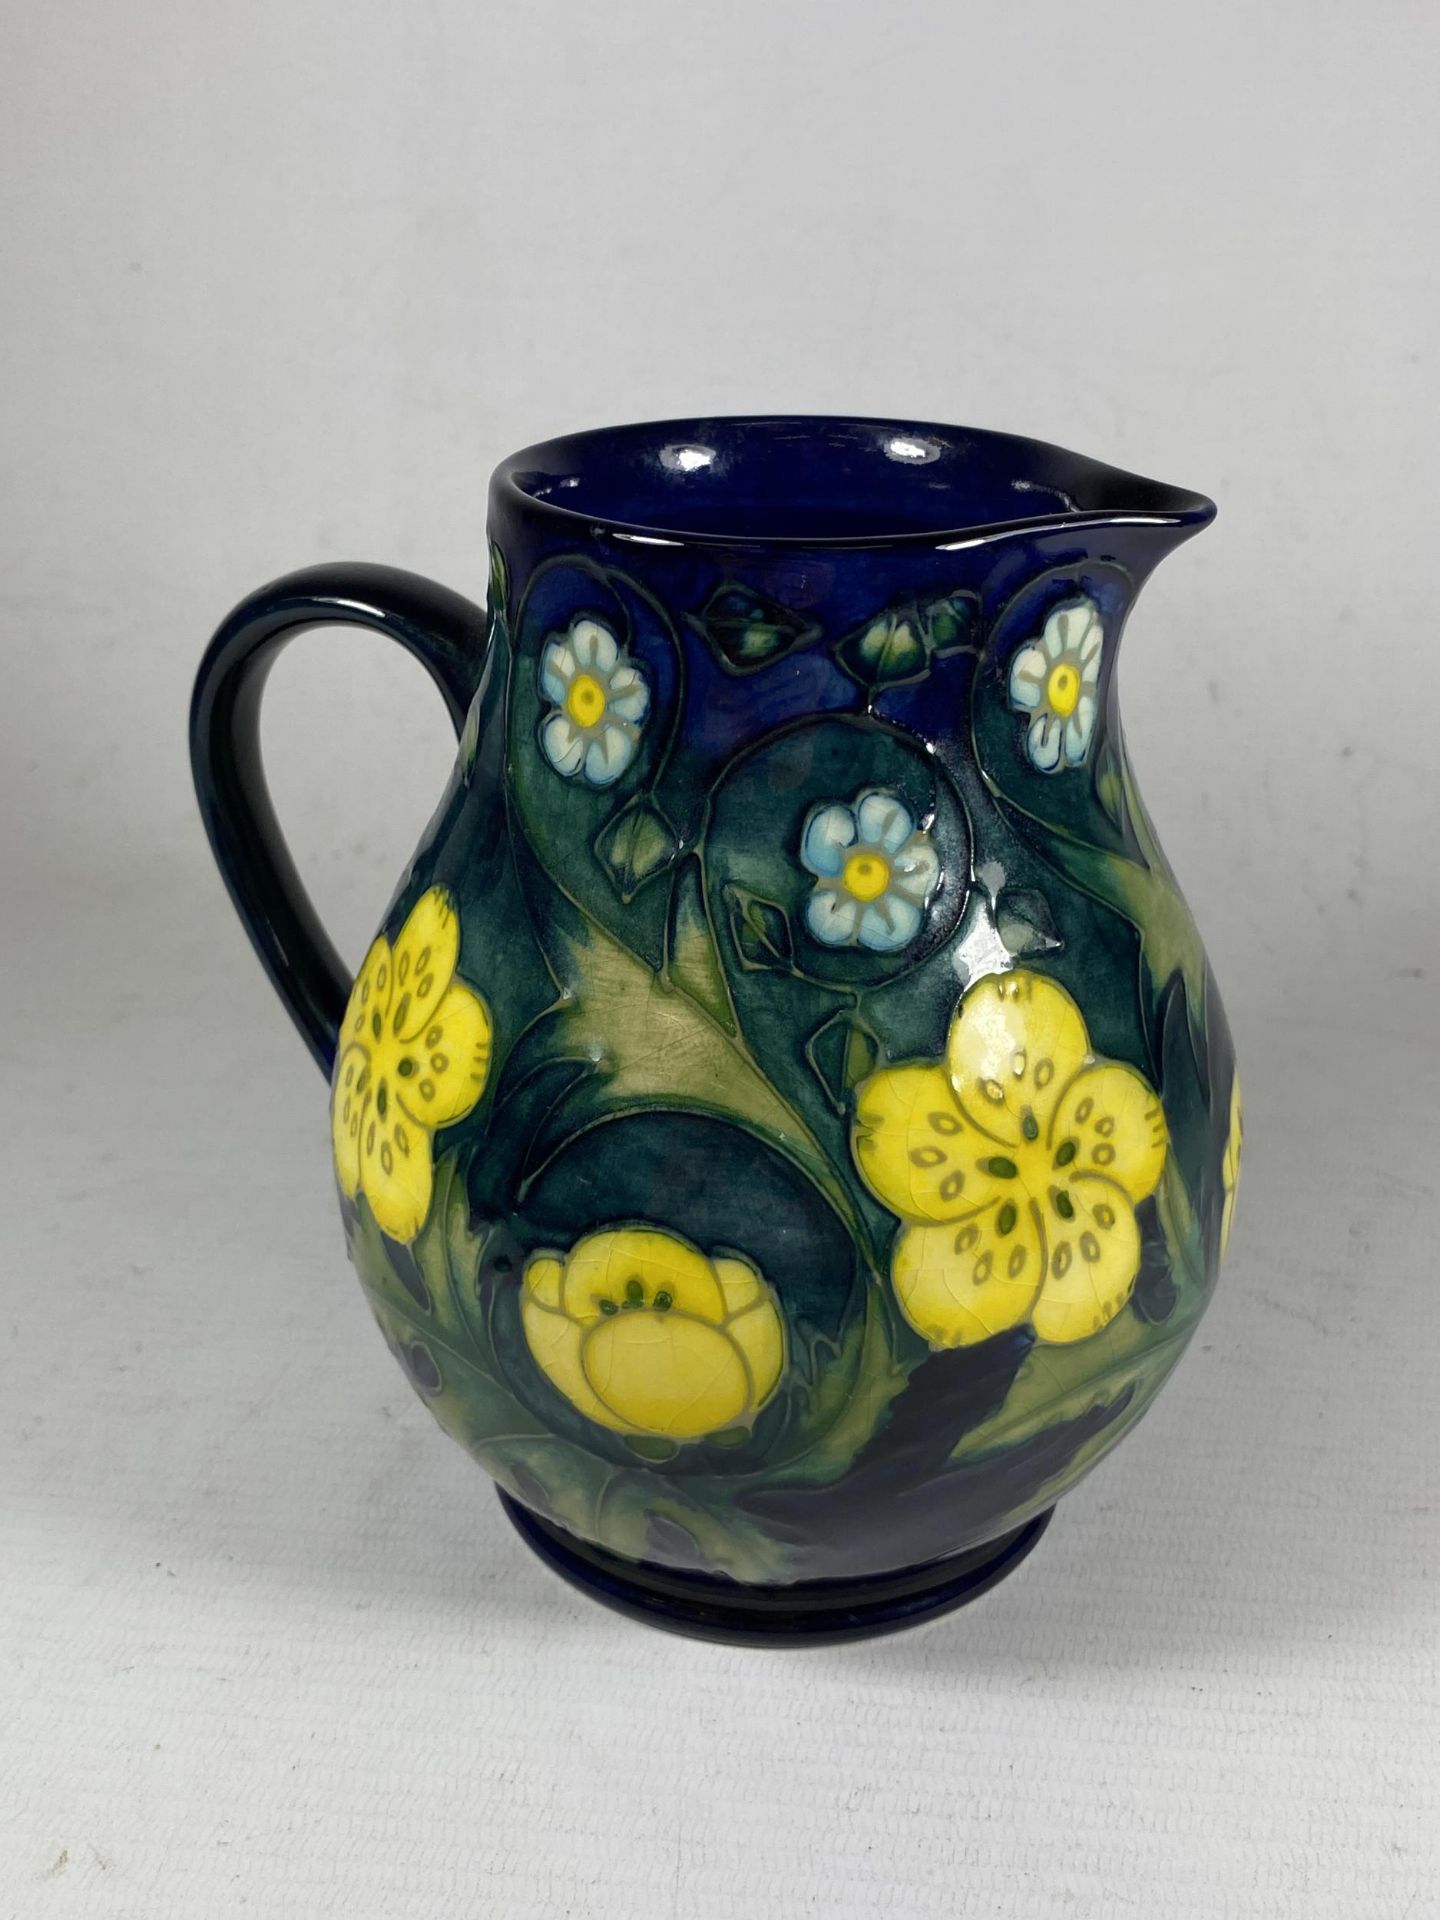 A MOORCROFT POTTERY BUTTERCUP PATTERN JUG BY SALLY TUFFIN - Image 2 of 3